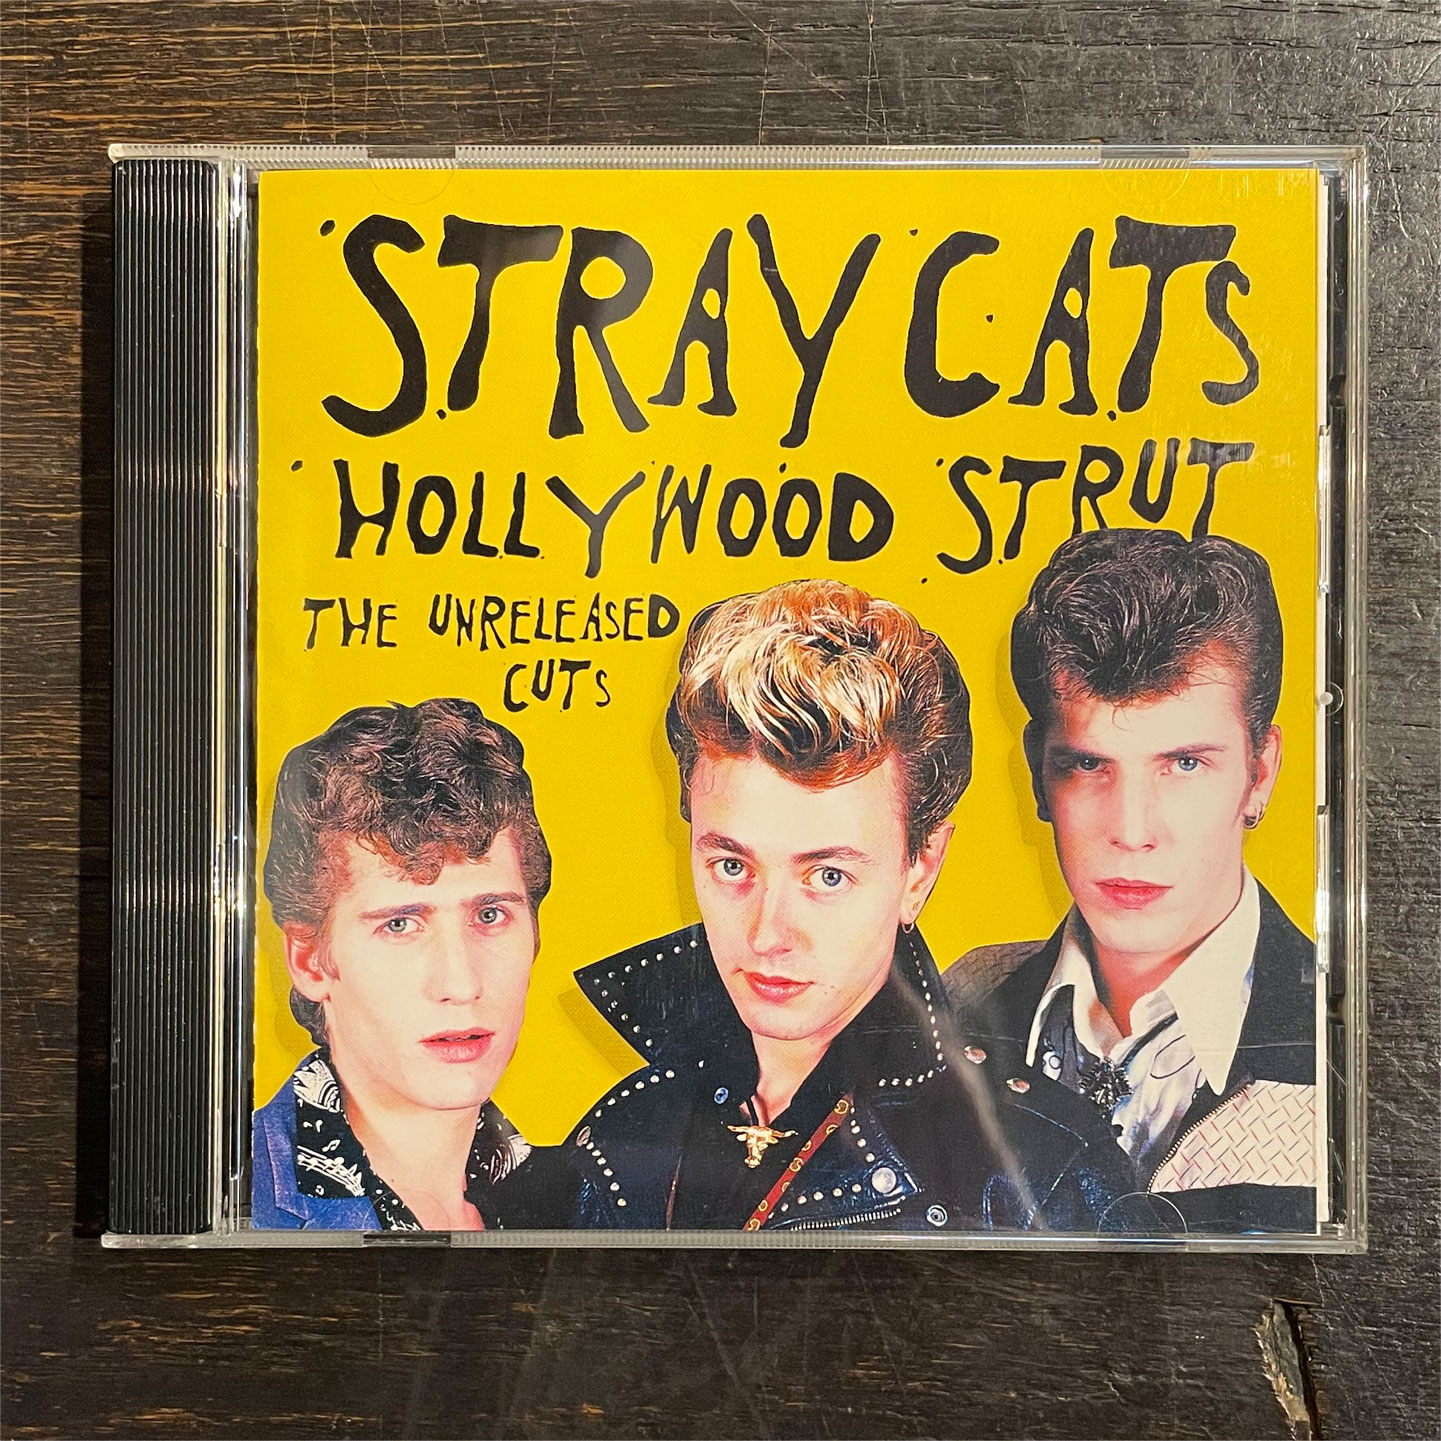 USED! STRAY CATS CD Hollywood Strut Unreleased Cuts